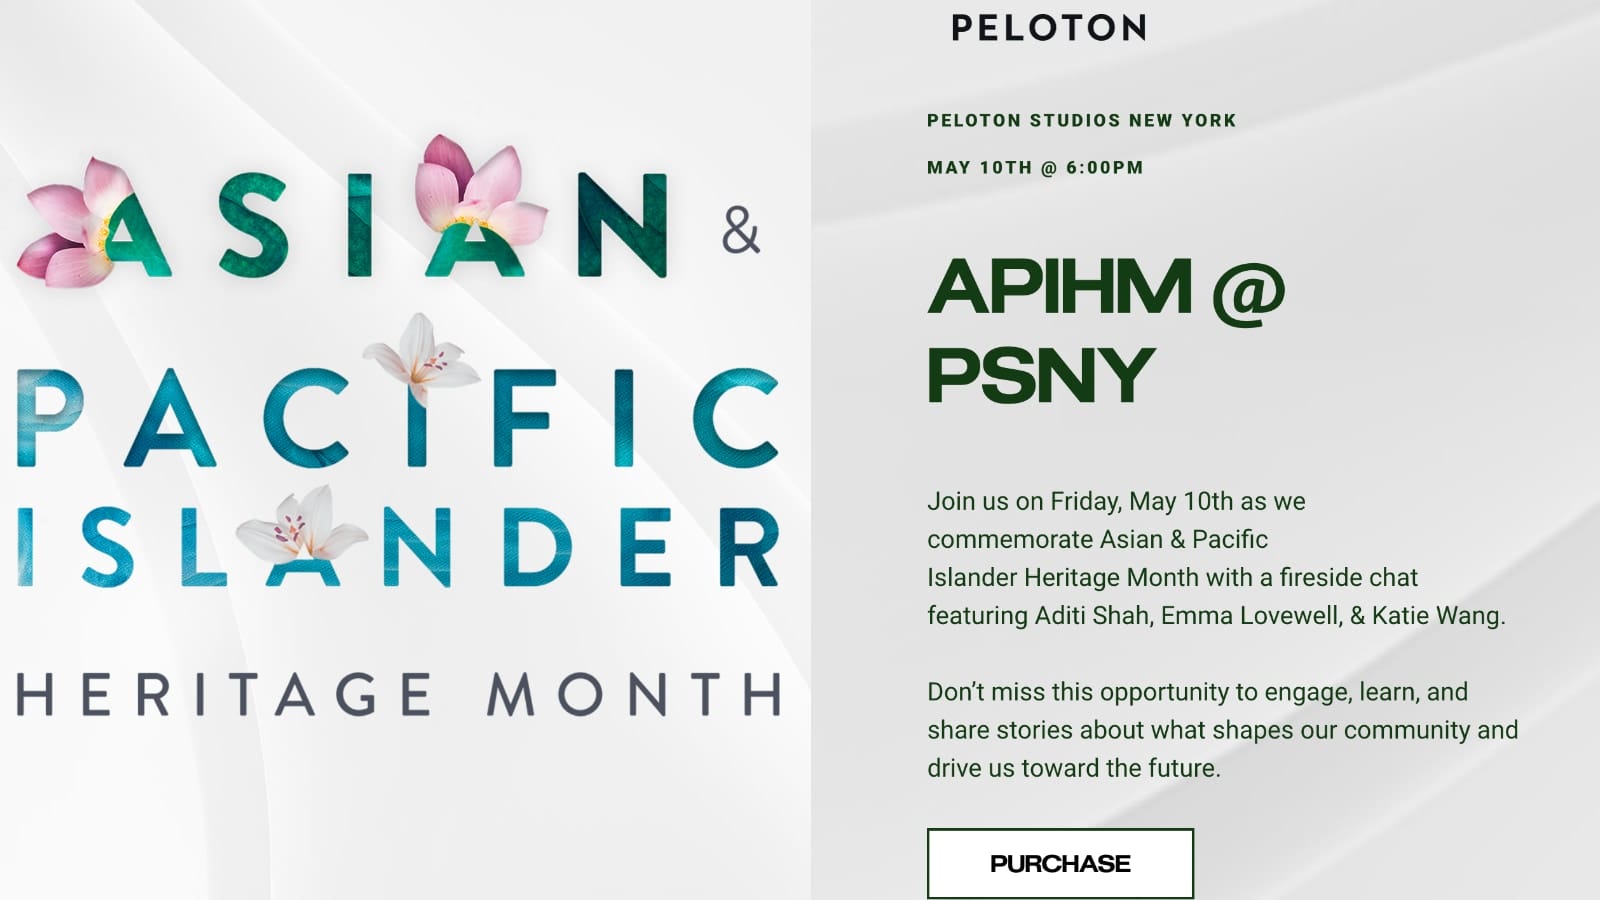 An Asian & Pacific Islander Heritage Month event at Peloton Studios New York.